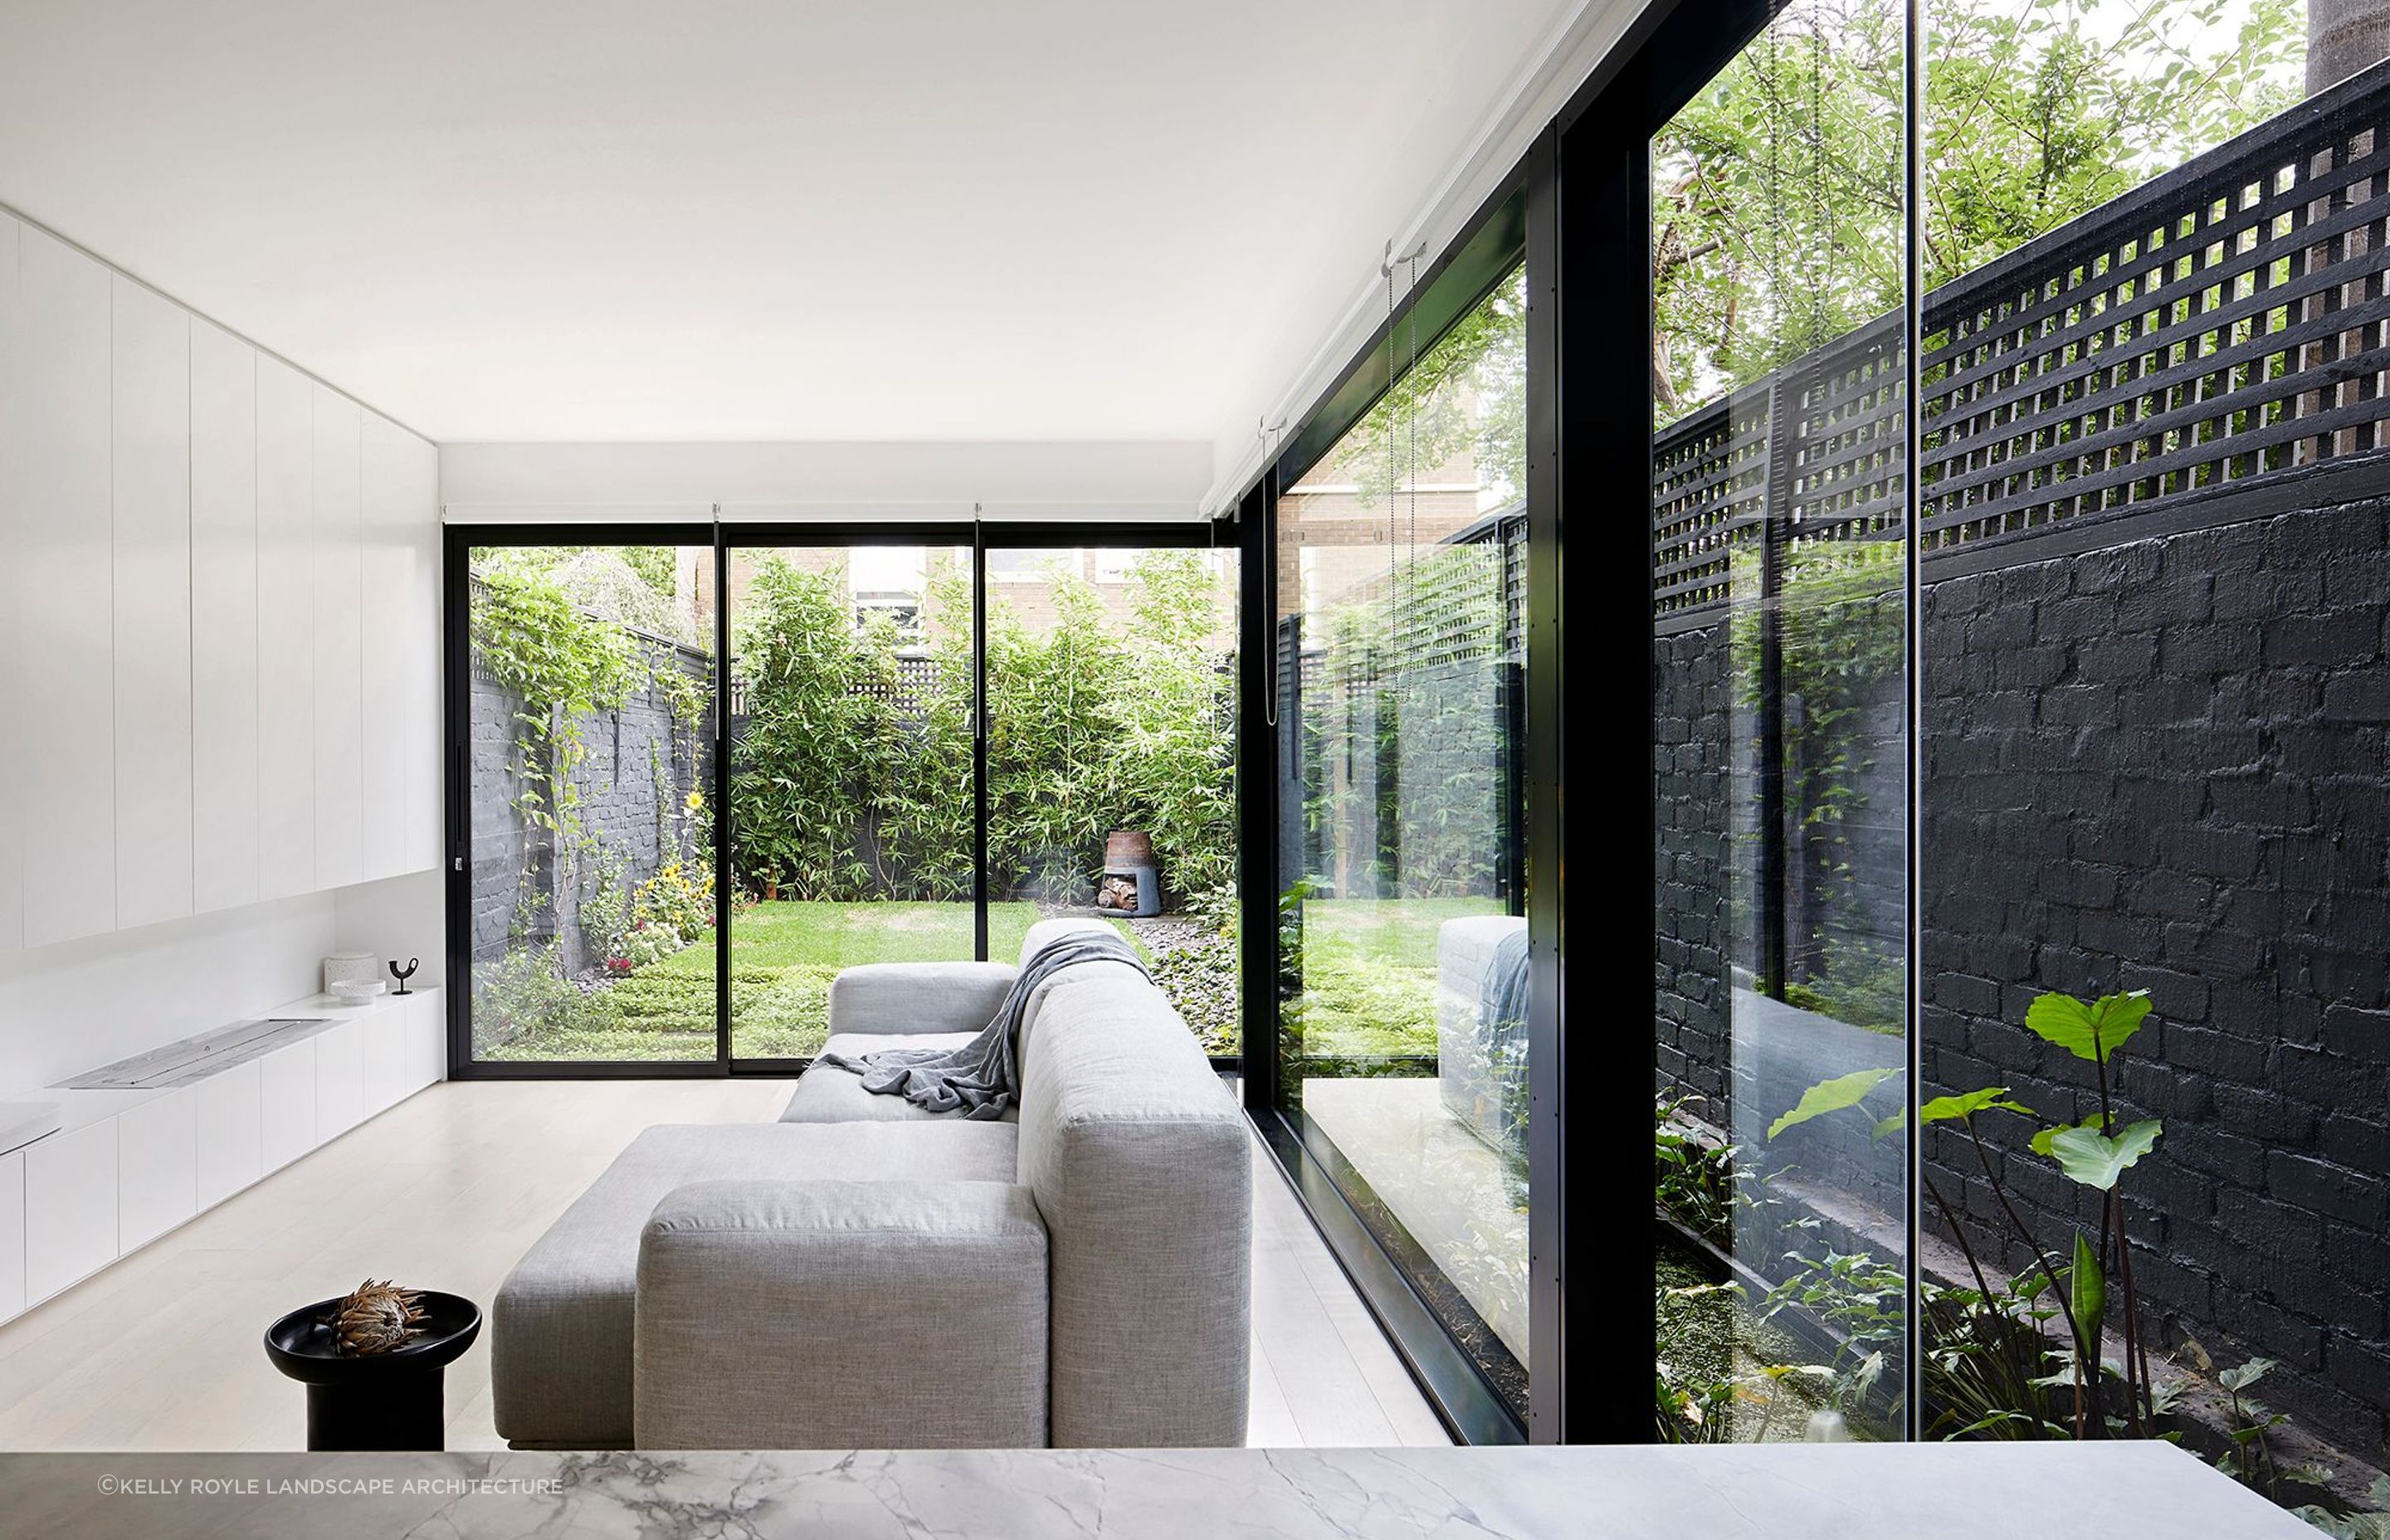 Large windows and natural light accentuate the open space that extends into the garden in this contemporary home in South Yarra - Photography: Tatjana Plitt